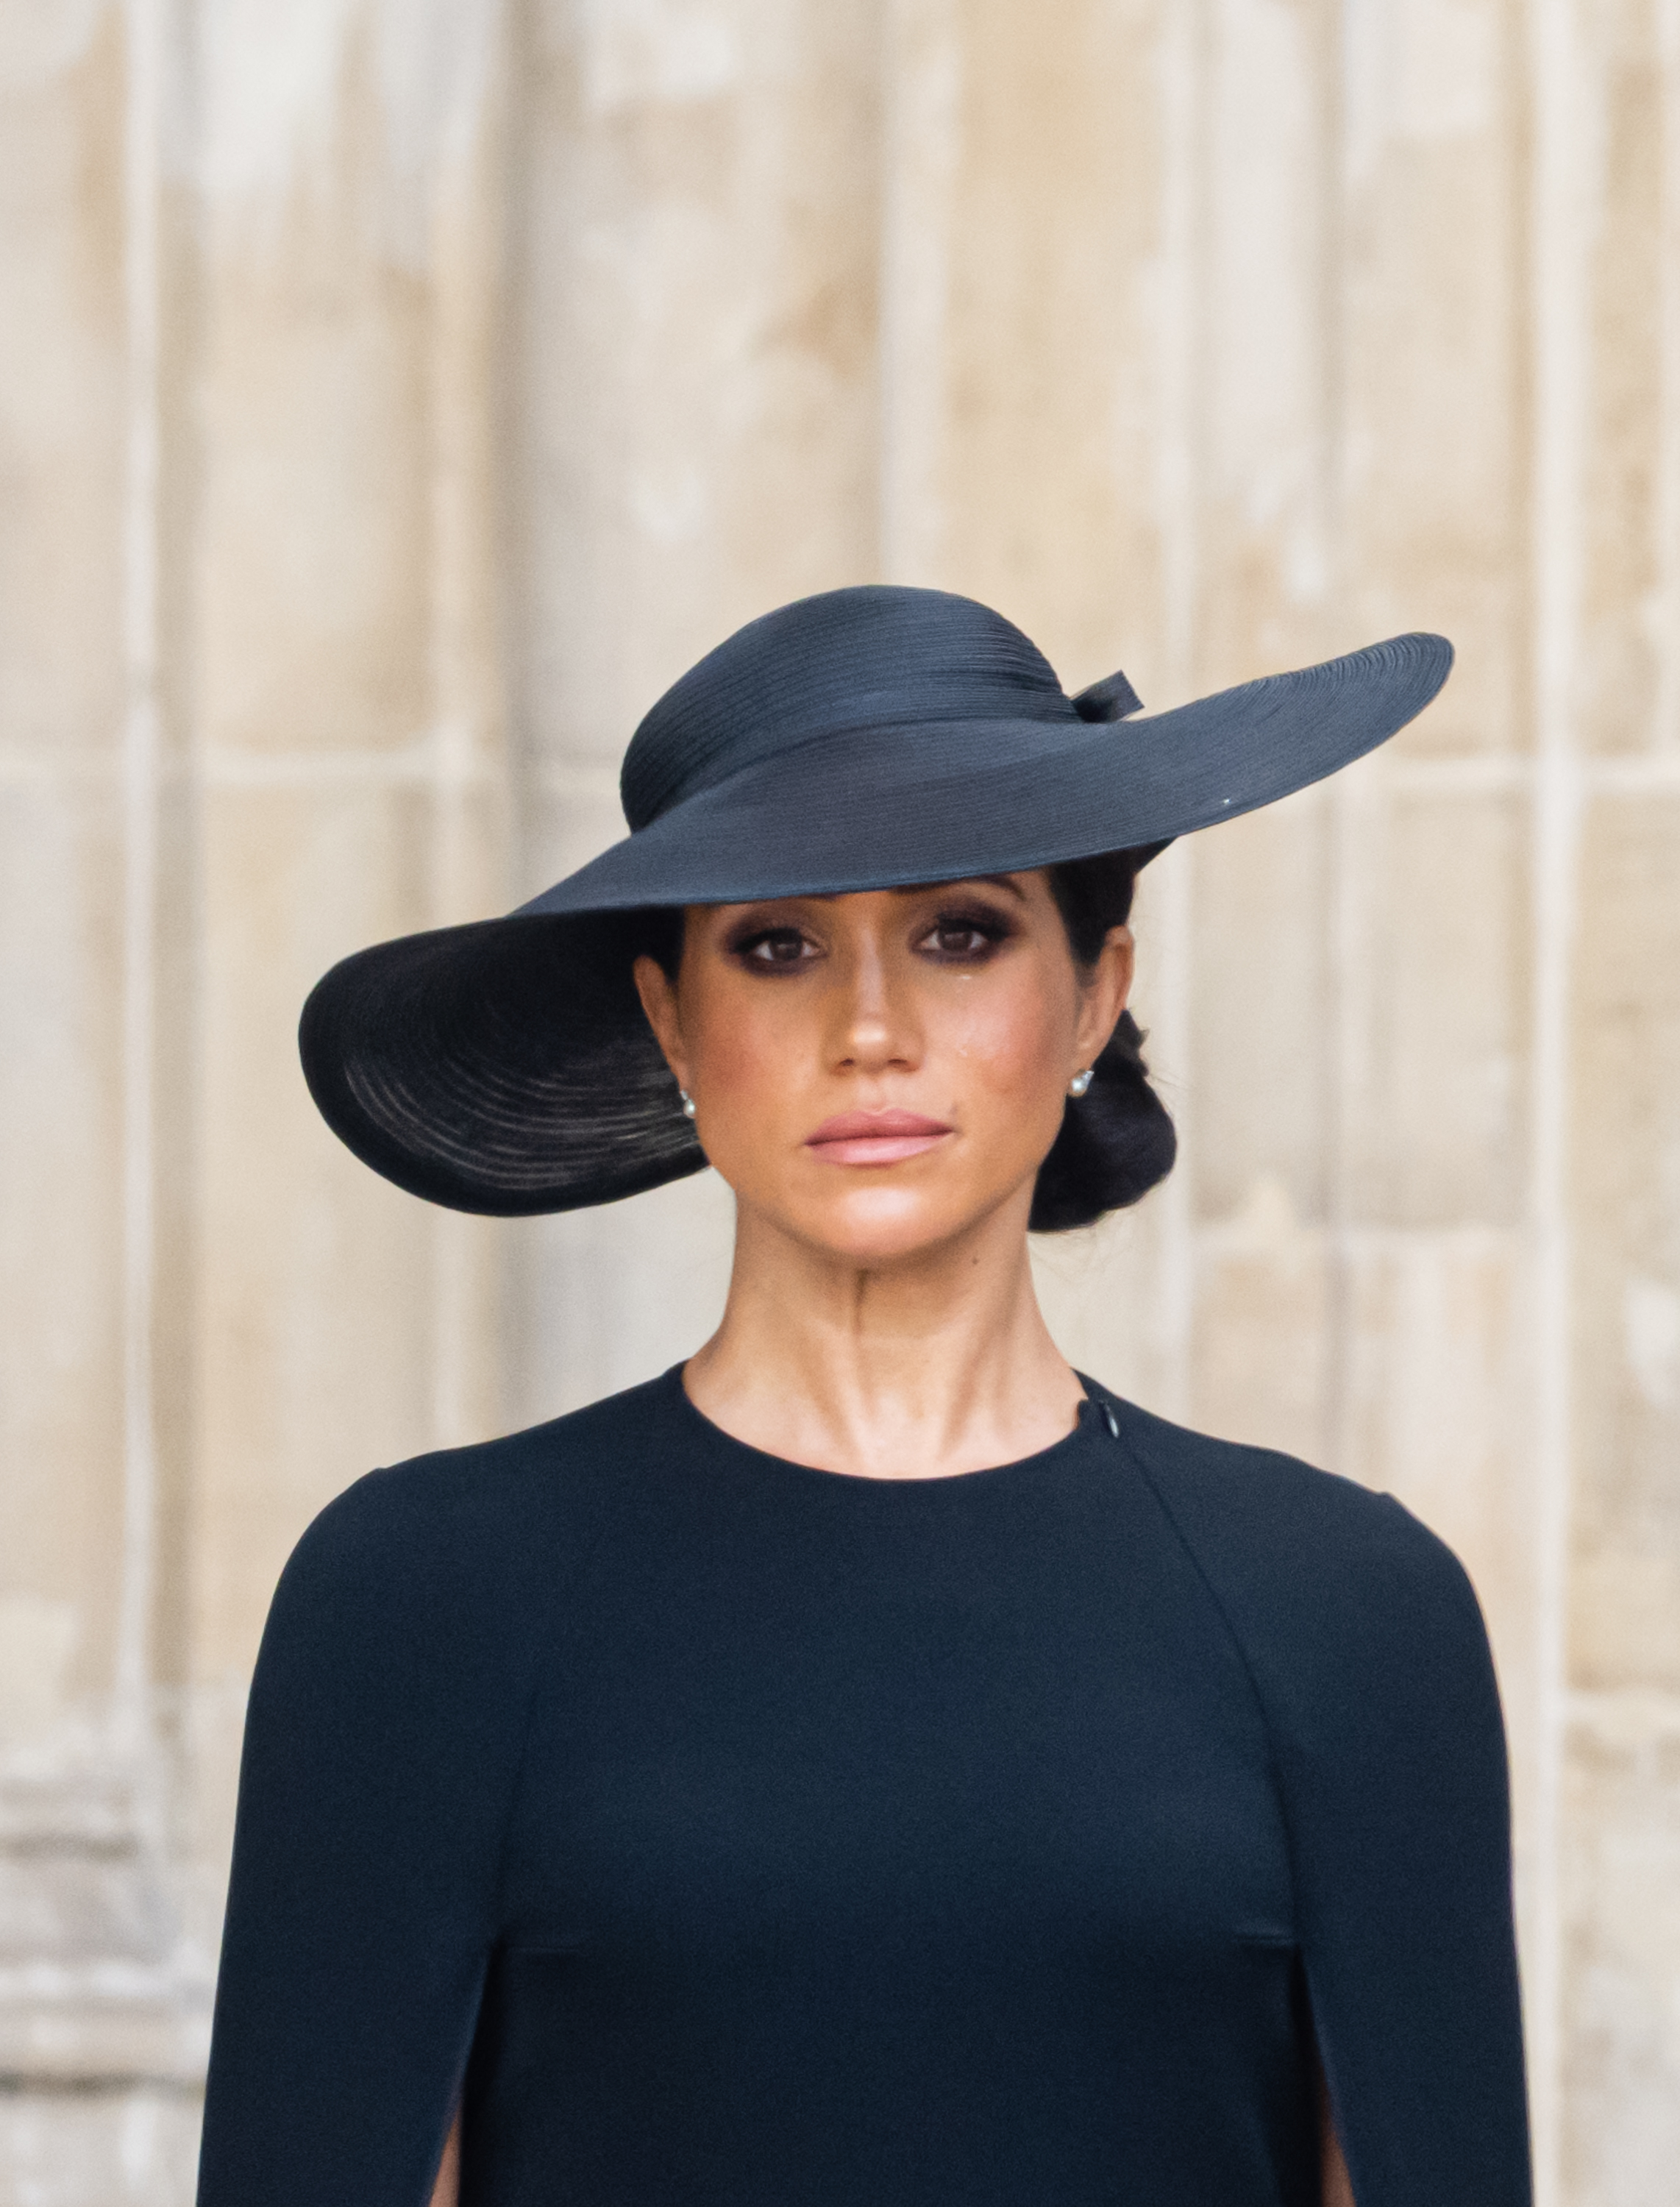 Duchess of Meghan at the State Funeral of Queen Elizabeth II on September 19, 2022, in London, England | Source: Getty Images